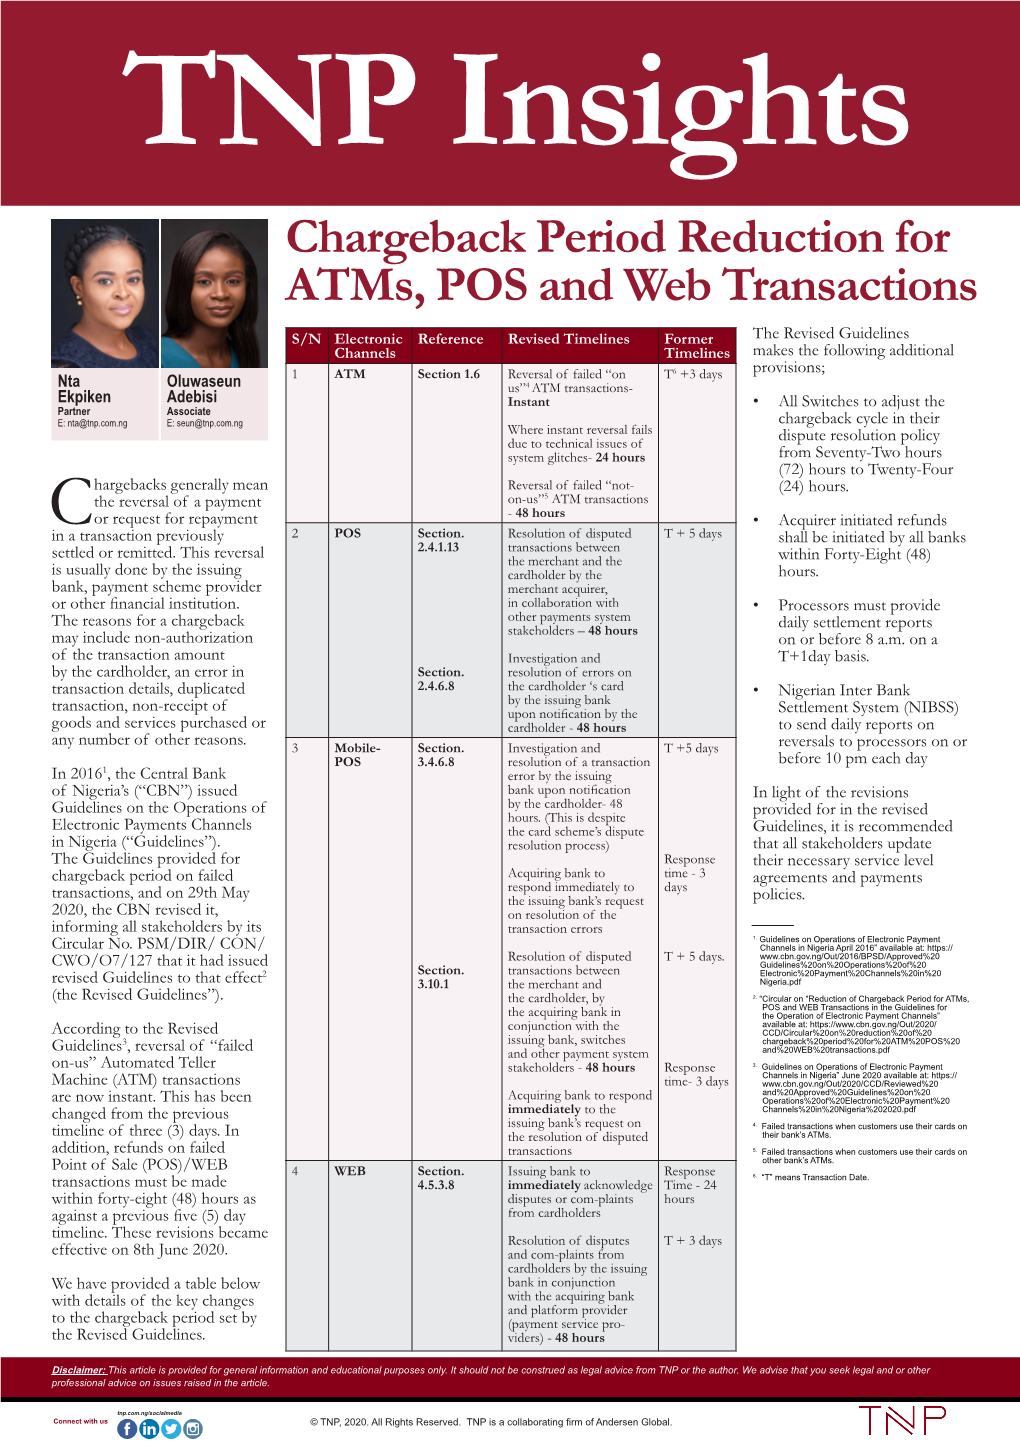 Chargeback Period Reduction for Atms, POS and Web Transactions